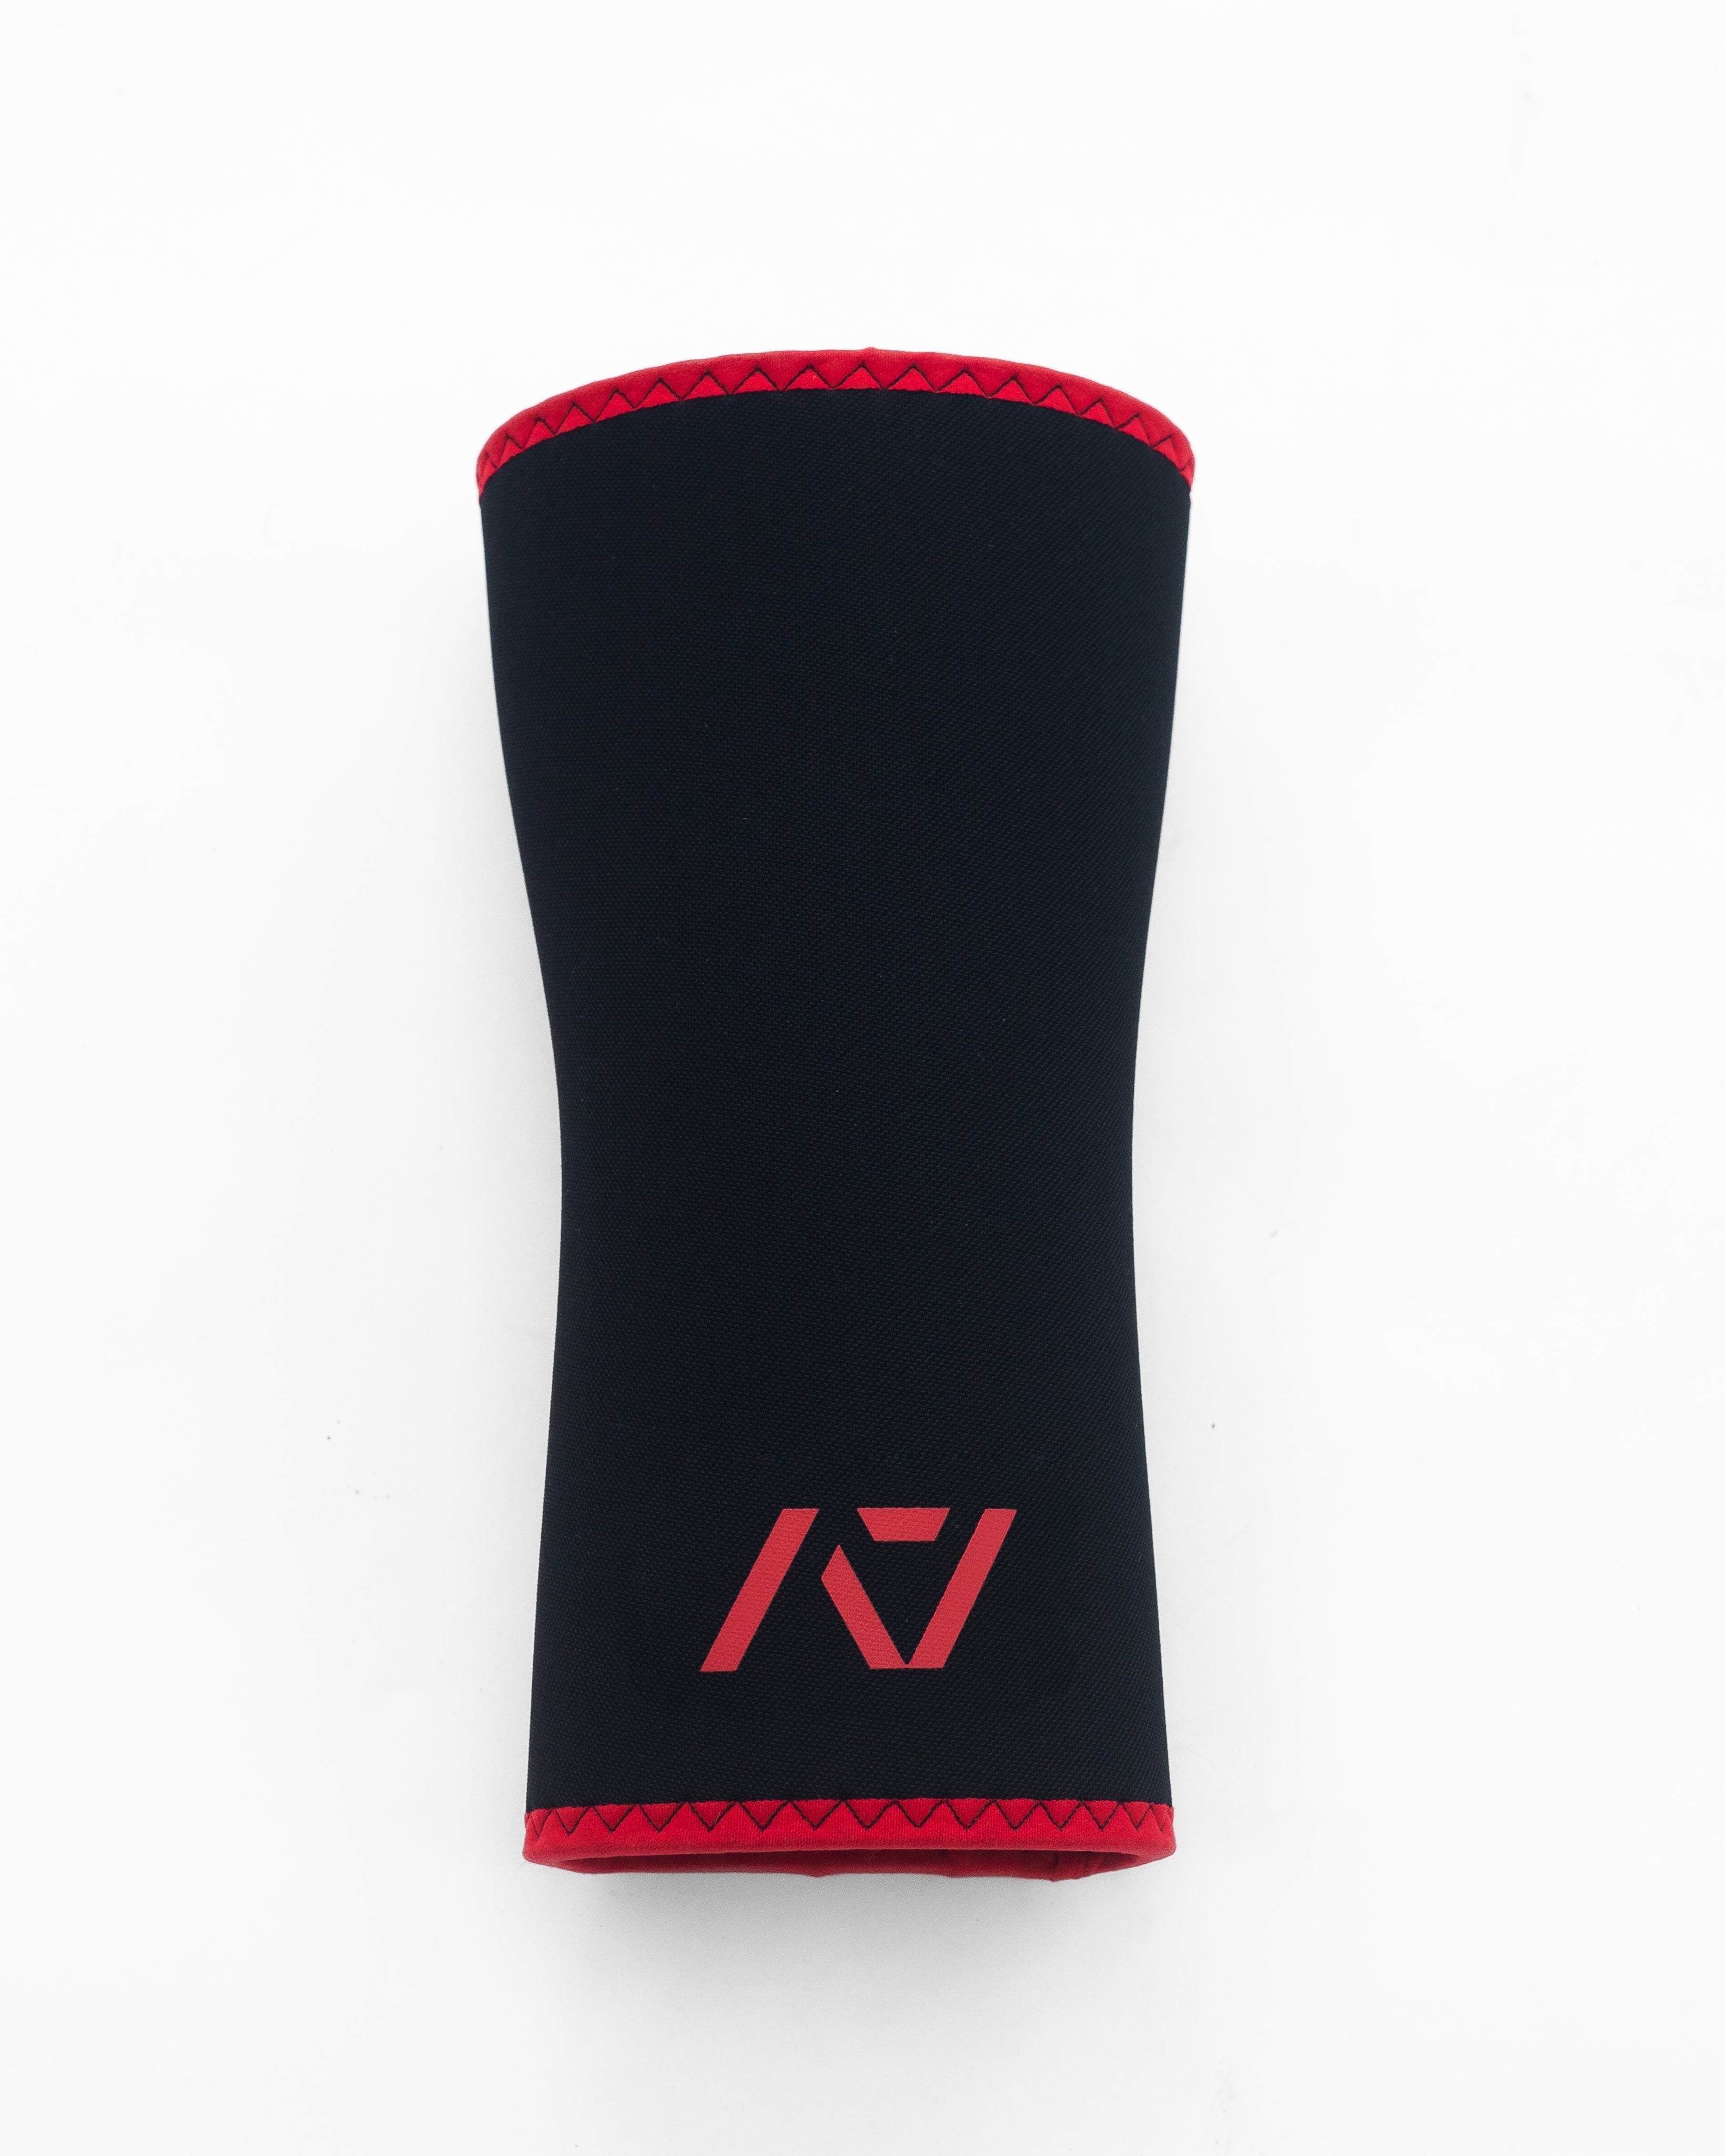 Hourglass Knee Sleeves - Red Dawn| A7 Europe Shipping to EU – A7 ...